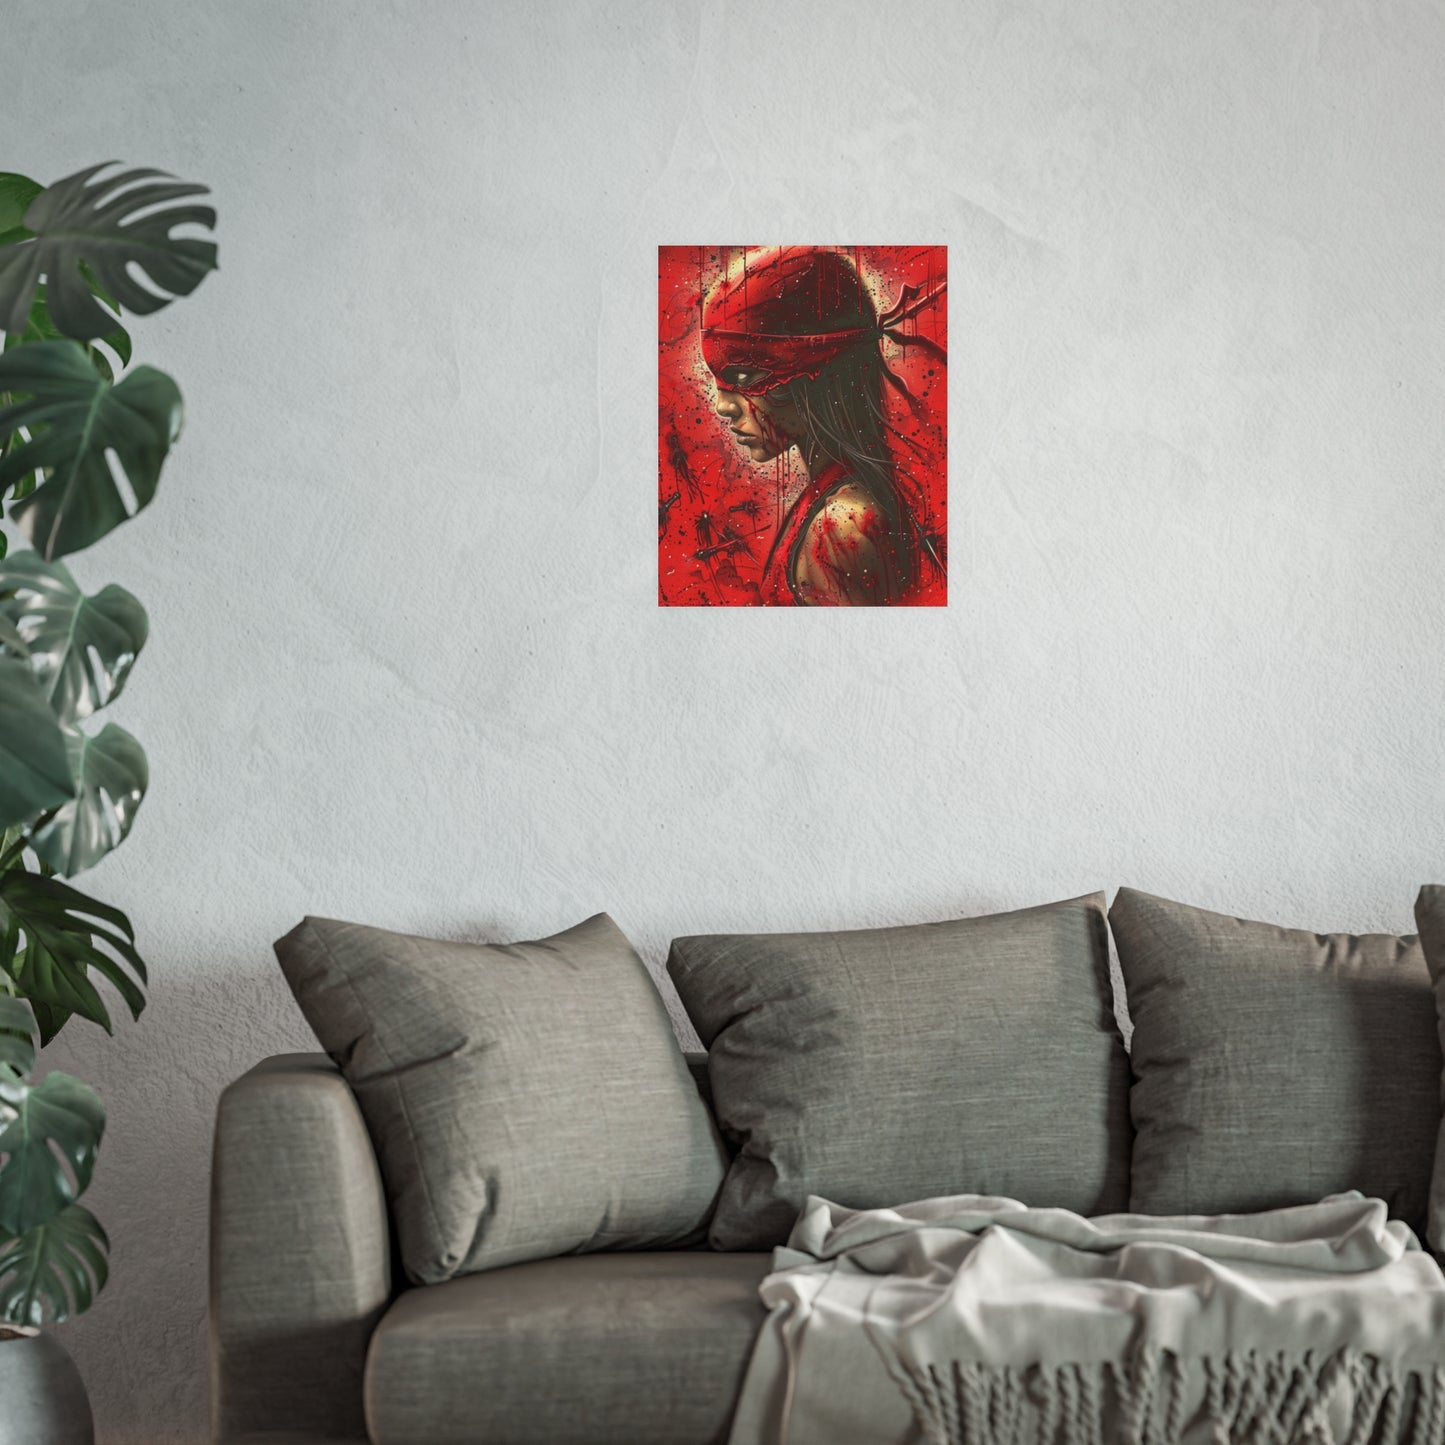 Satin and Archival Matte Posters: Elektra #1 (inspired by Marvel)